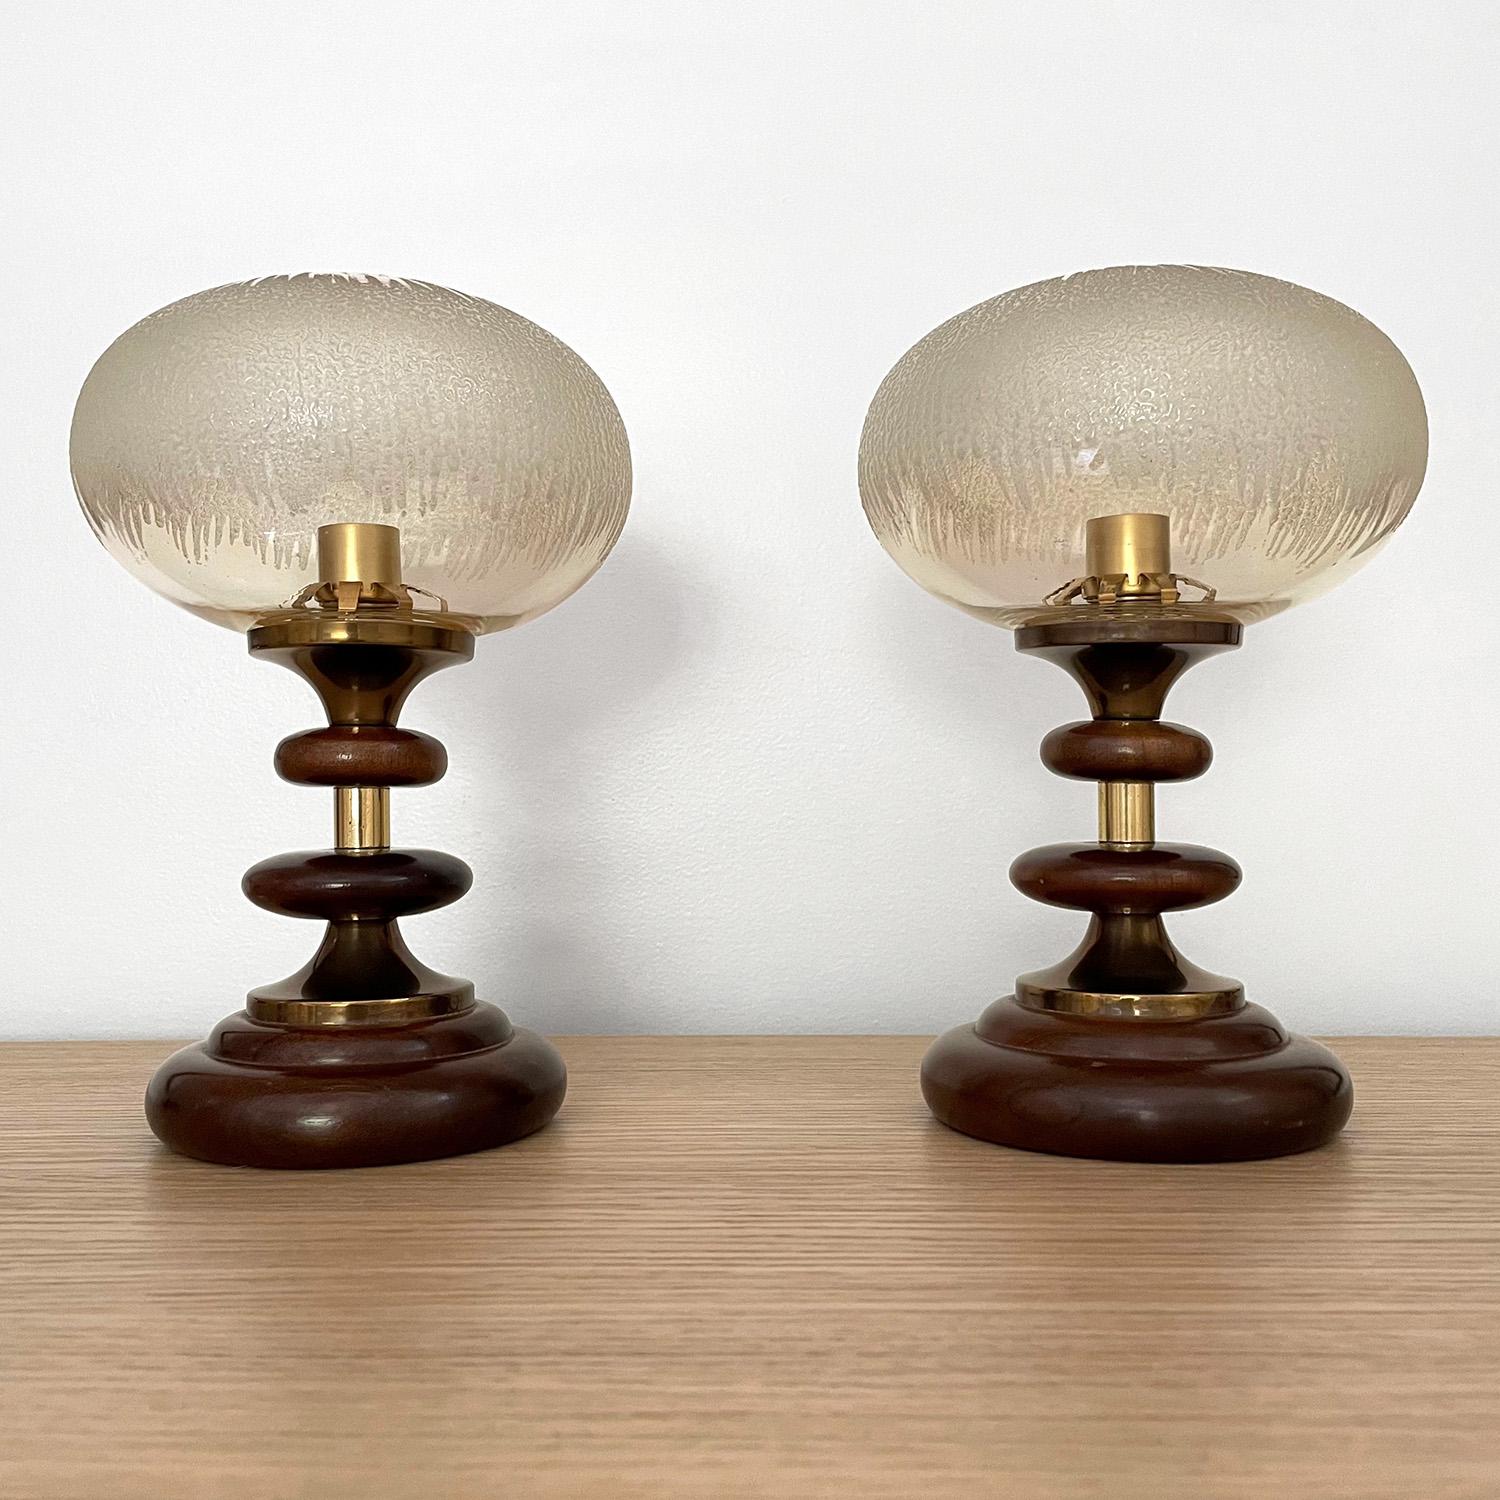 Pair of French tiered wood lamps
France, circa 1960’s
Sculpted bulbous wood discs stacked with brass toned accent pieces 
Frosted textured glass globes beautifully illuminate light
One socket is missing a clip - please reference photos
Patina from